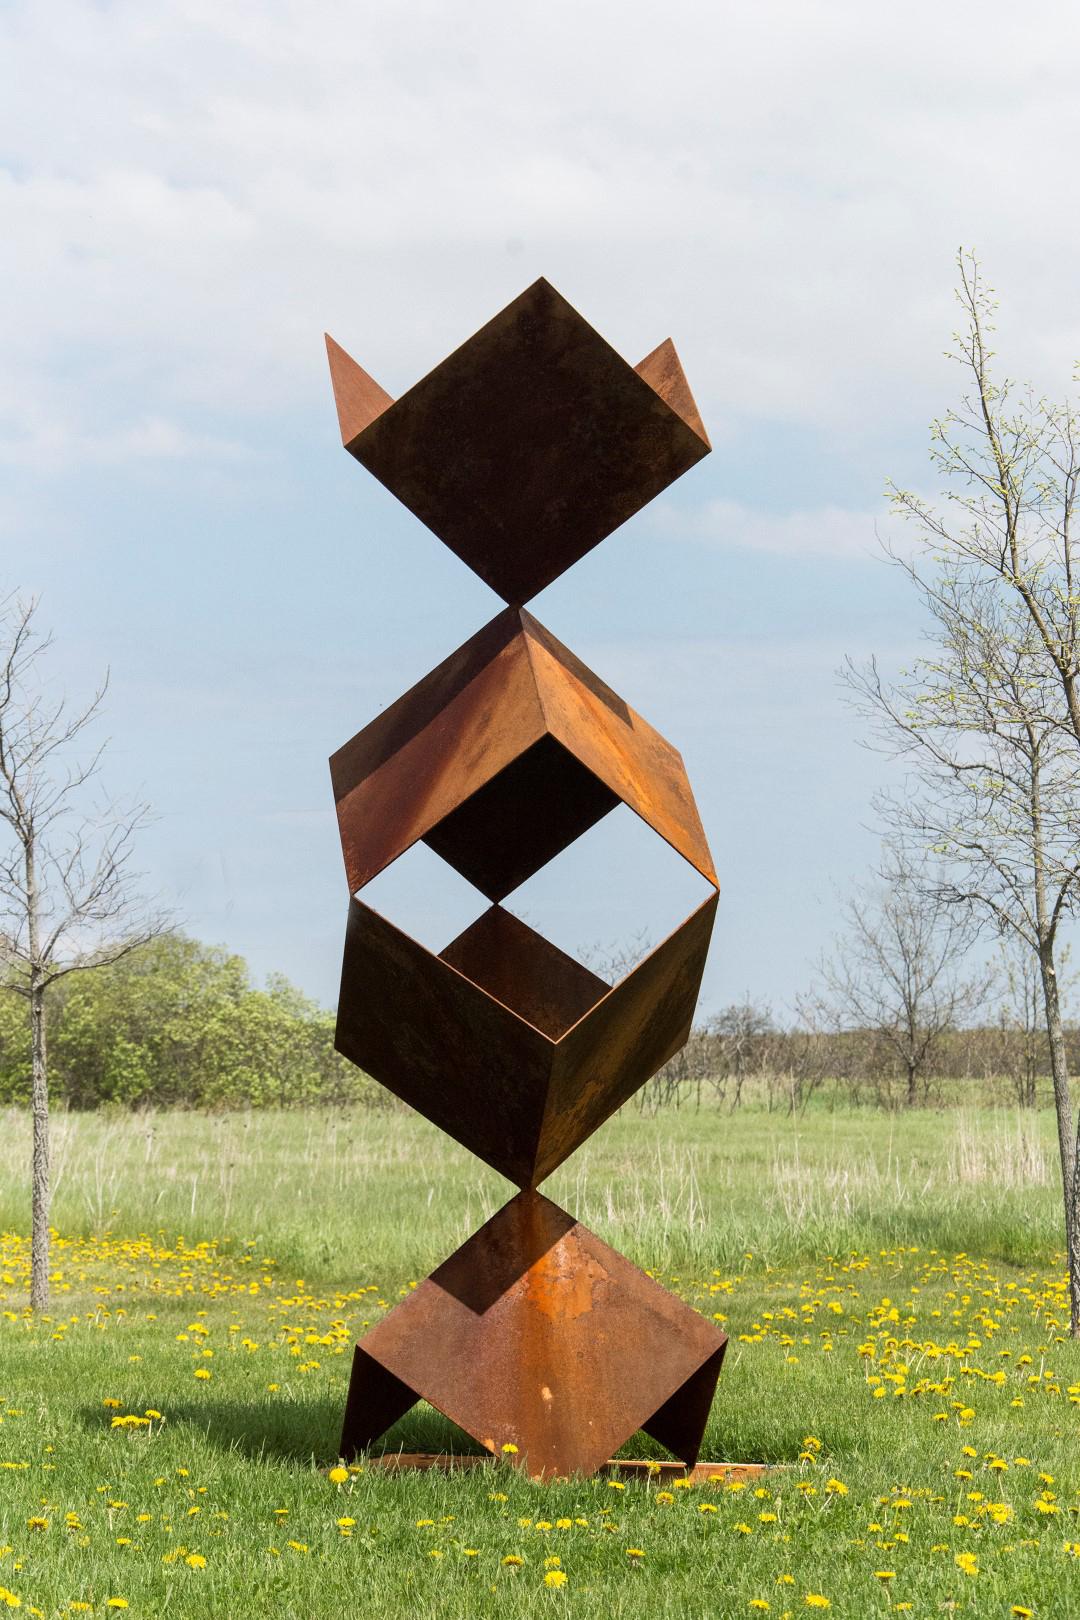 Gord Smith and Avron Mintz Abstract Sculpture - Breakthrough - large, tall, patinated, geometric, corten steel outdoor sculpture